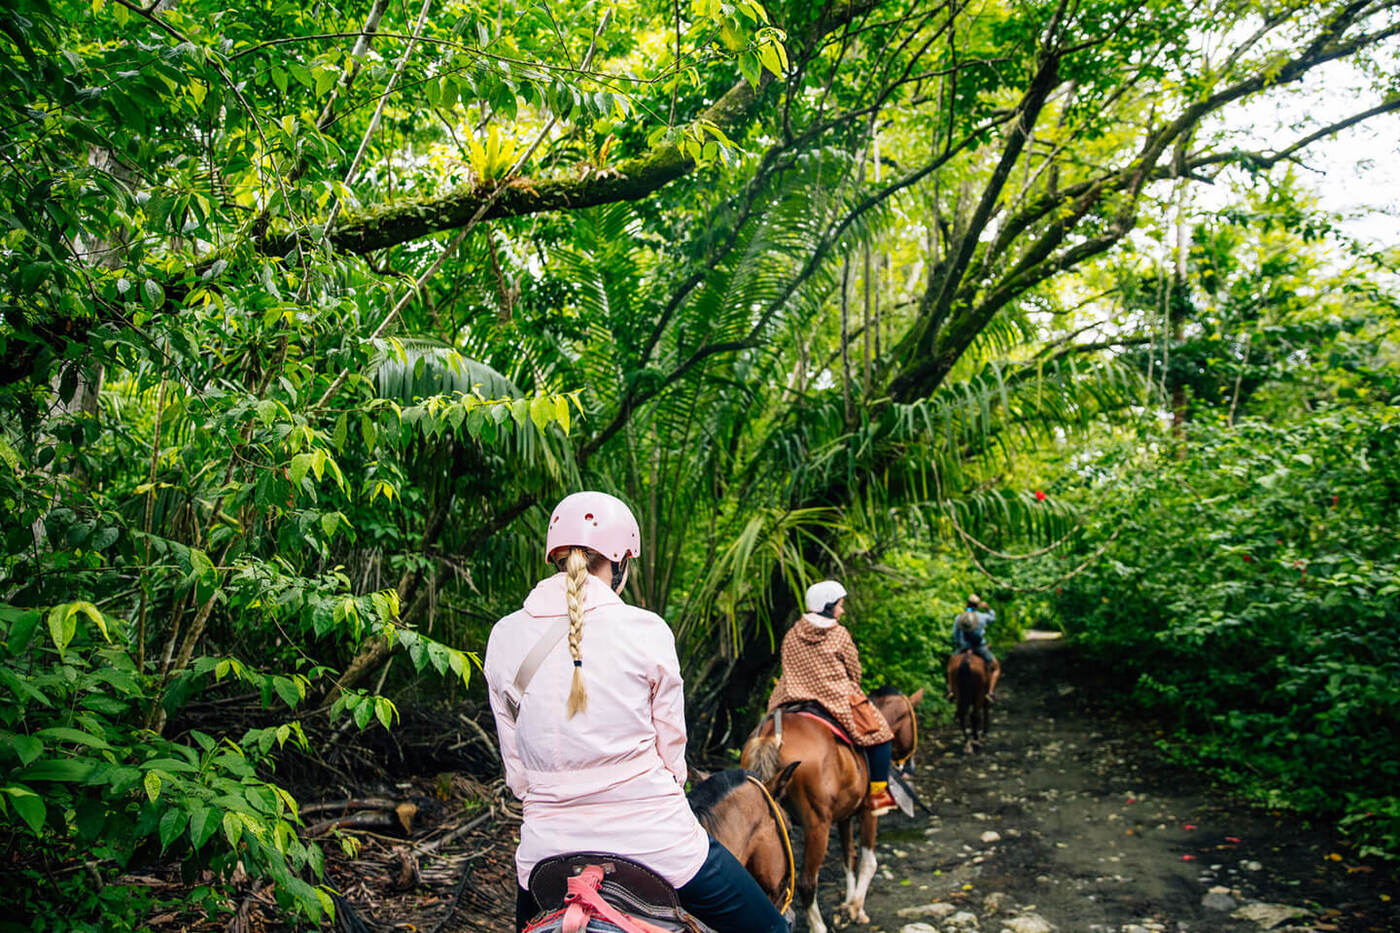 2 people riding horseback through forest